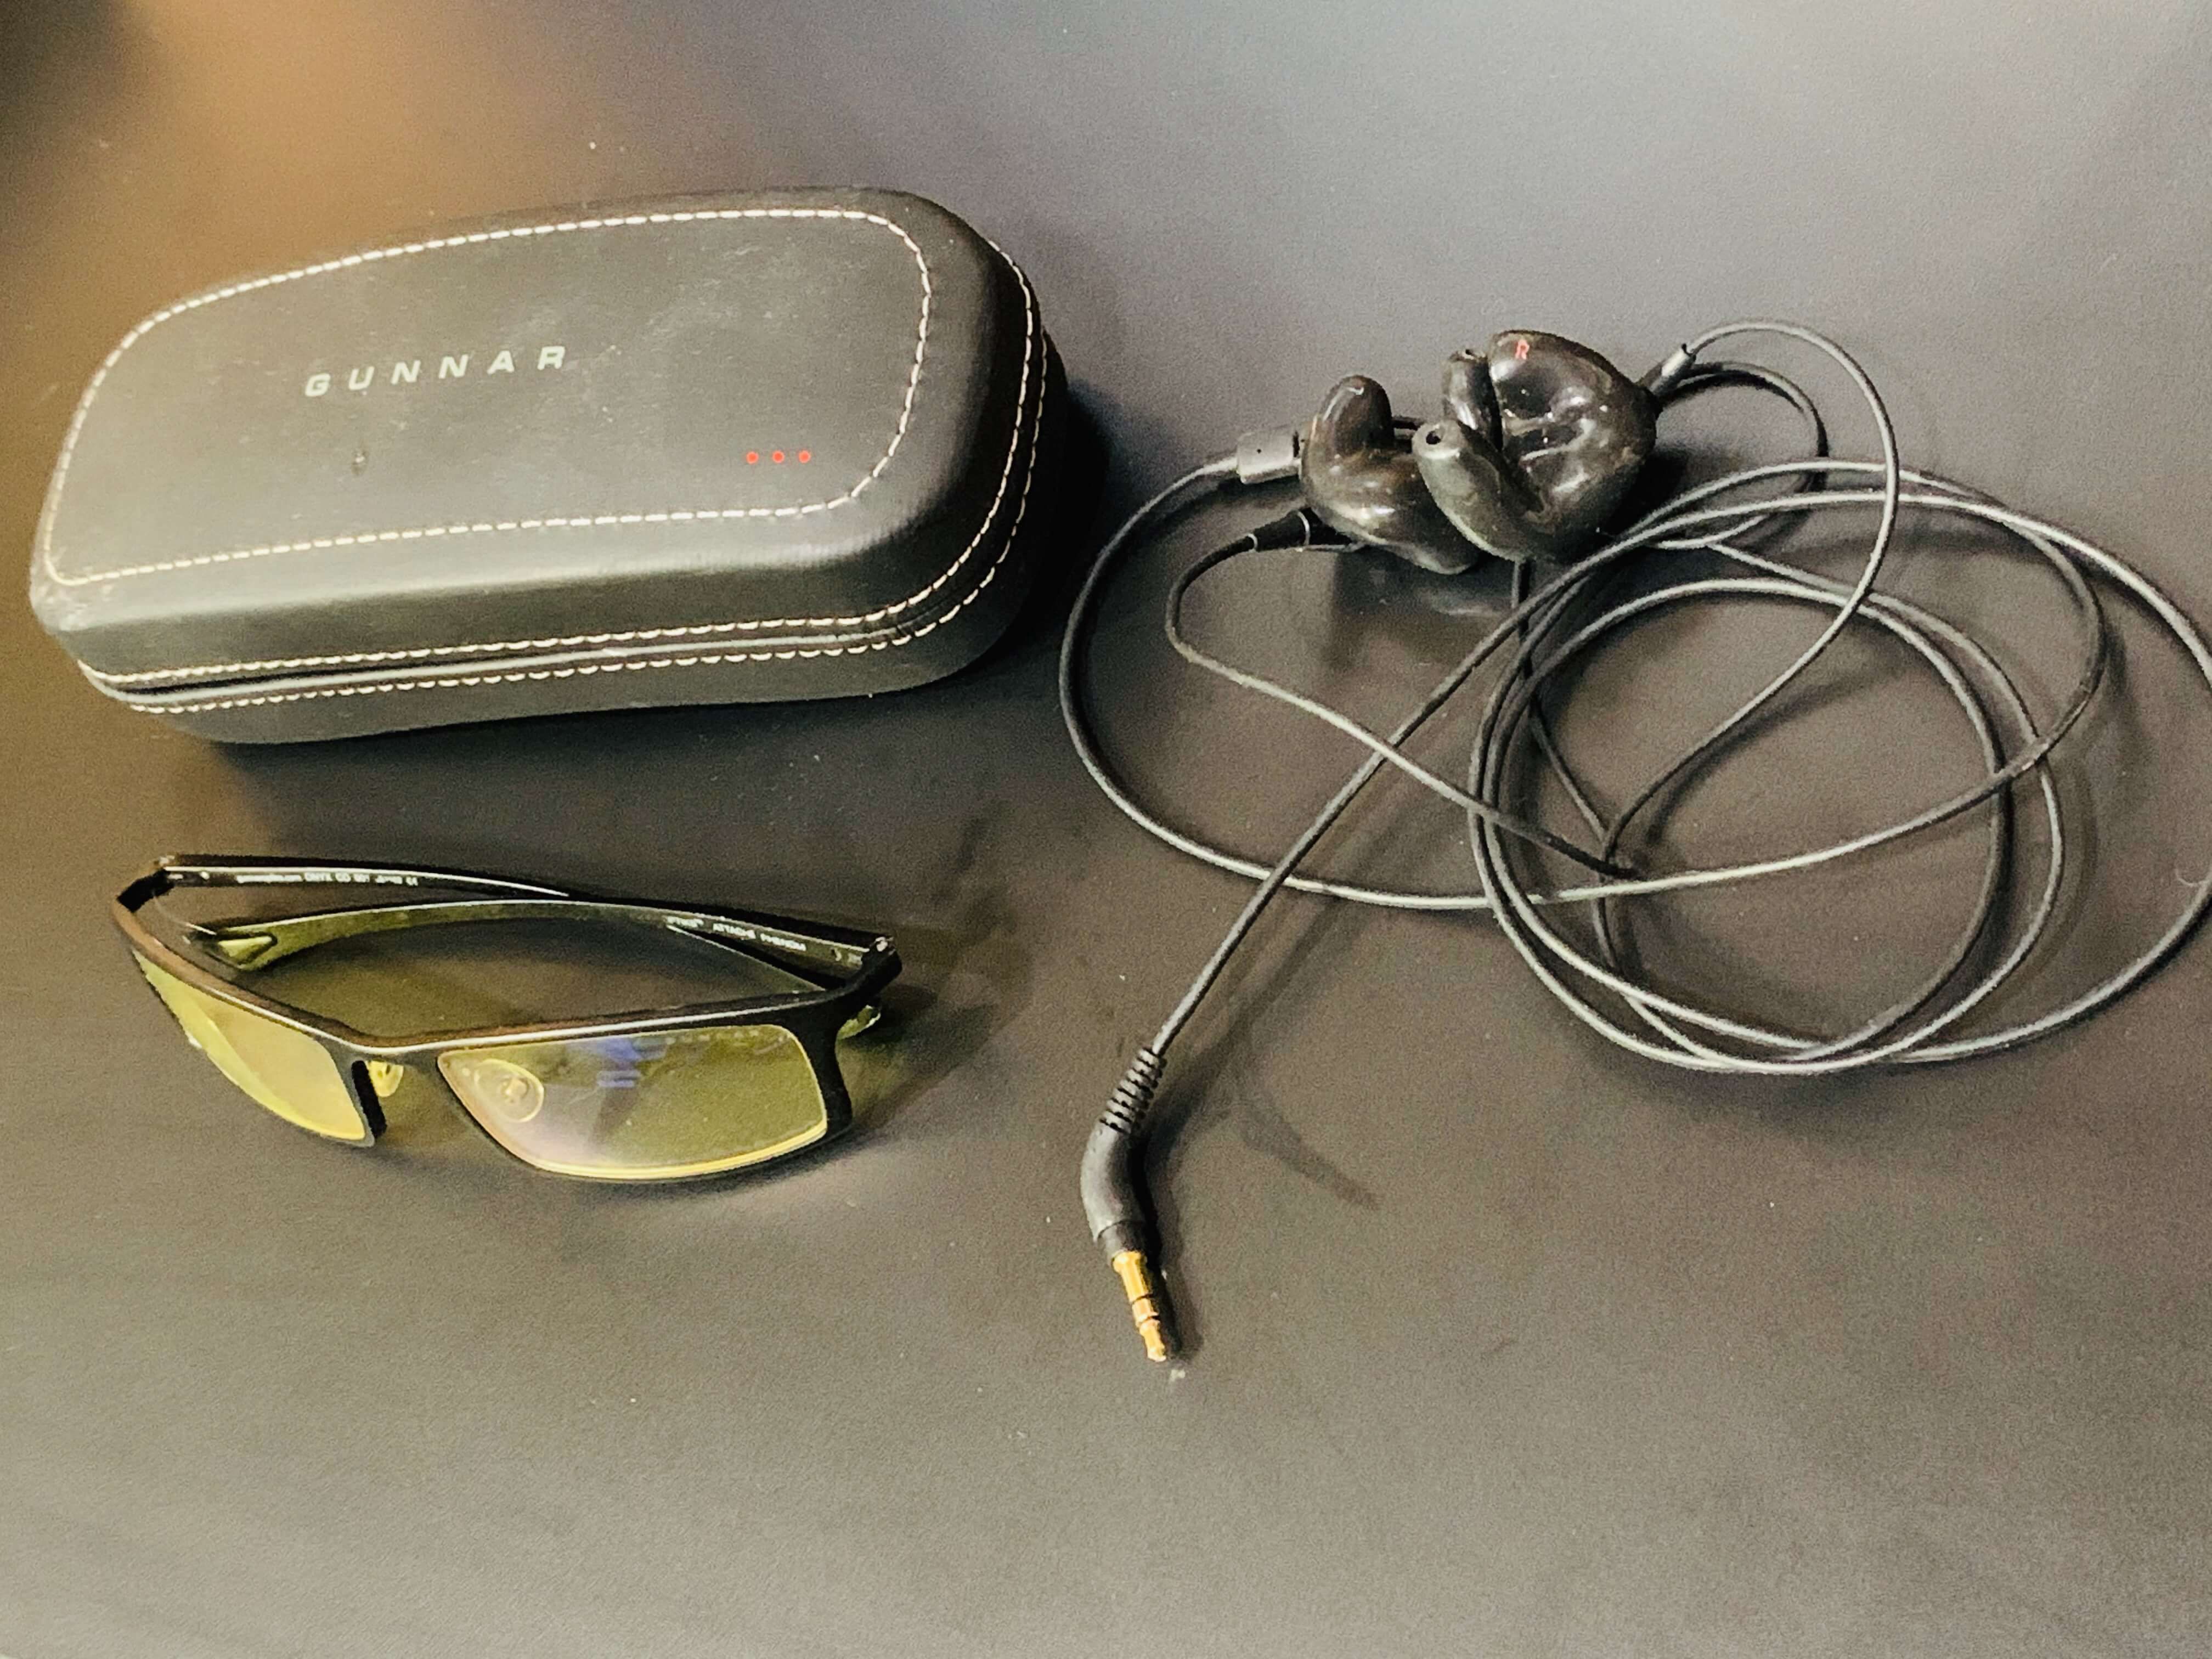 Gunnars and noise isolating earbuds